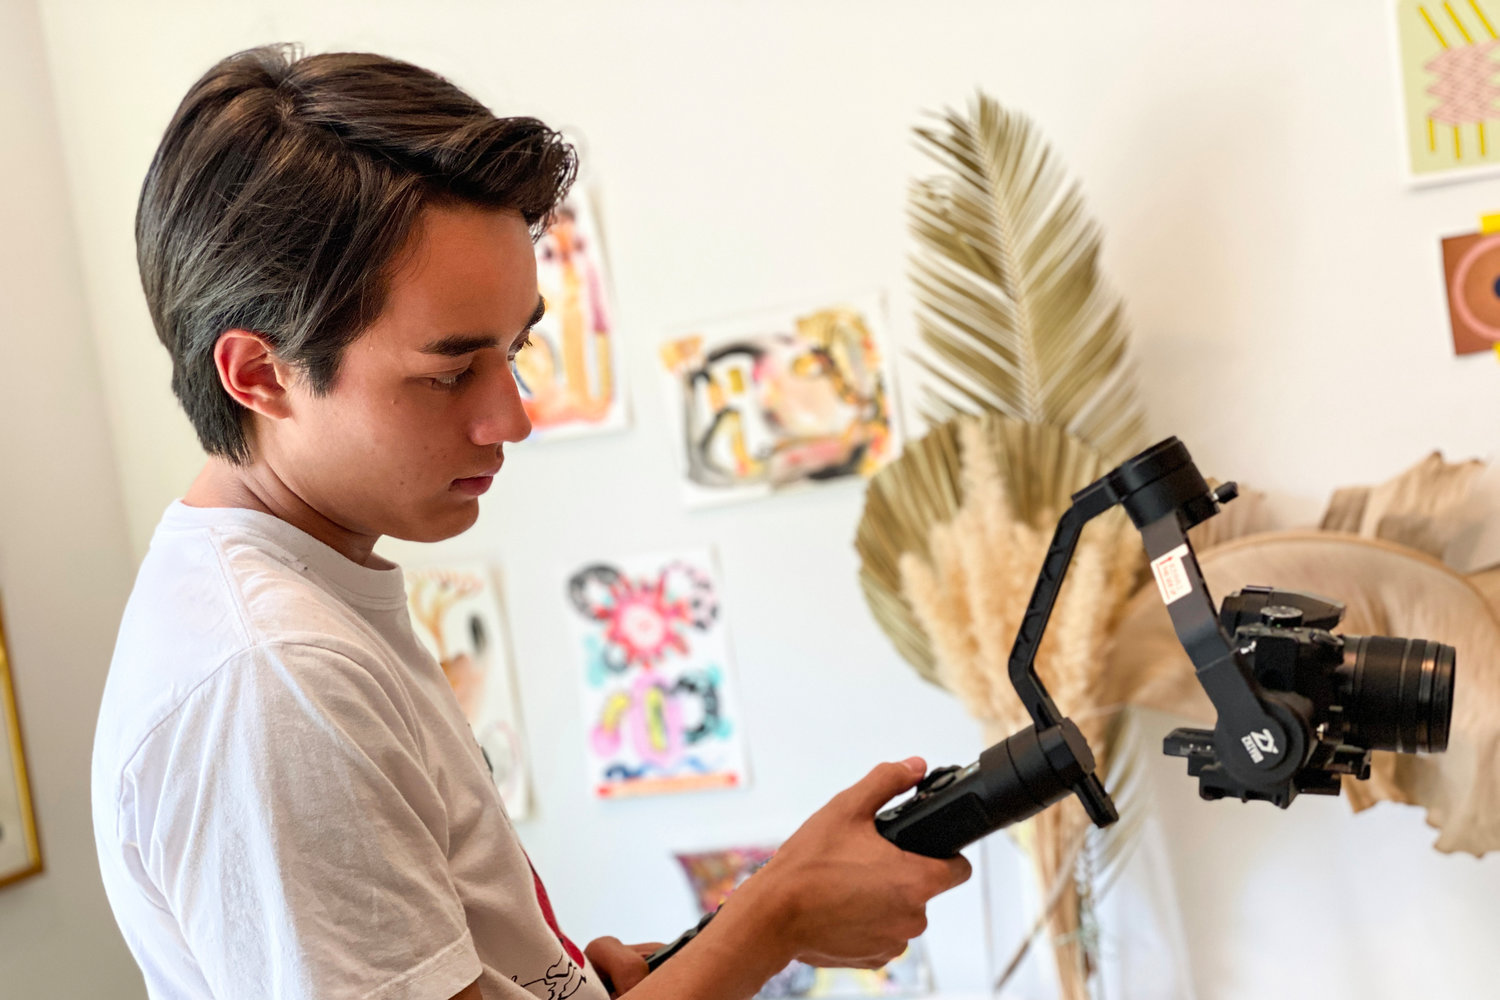 All throughout his years at Riverdale/Kingsbridge Academy, Jackson Van Horn can’t resist being behind the camera, creating new short films for his friends and family to enjoy. Now he’s taking it to the next level, heading to the University of Southern California’s School of Cinematic Arts in Los Angeles.